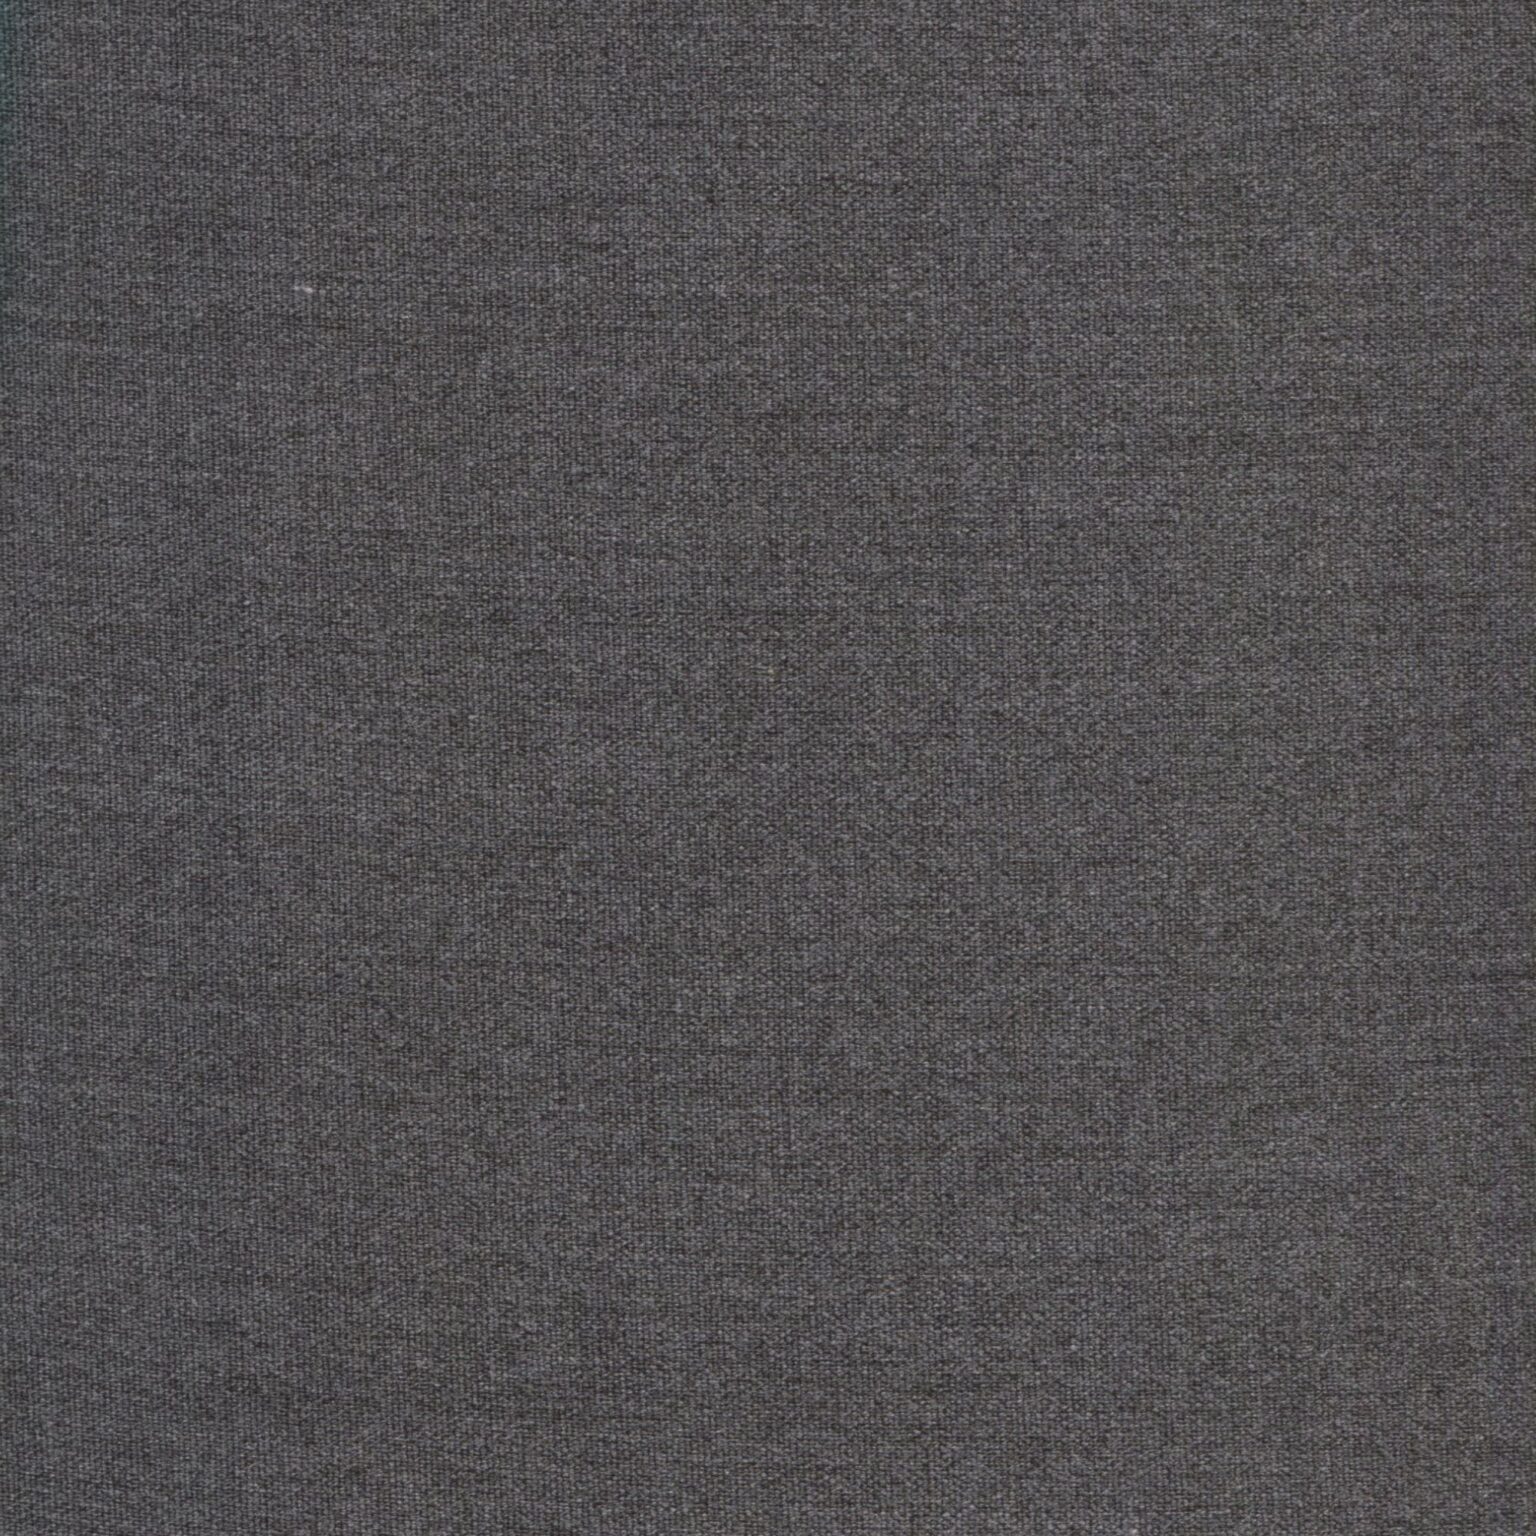 Barranquilla Polyester/Viscose Fabric - Charcoal Grey - 150cm Wide